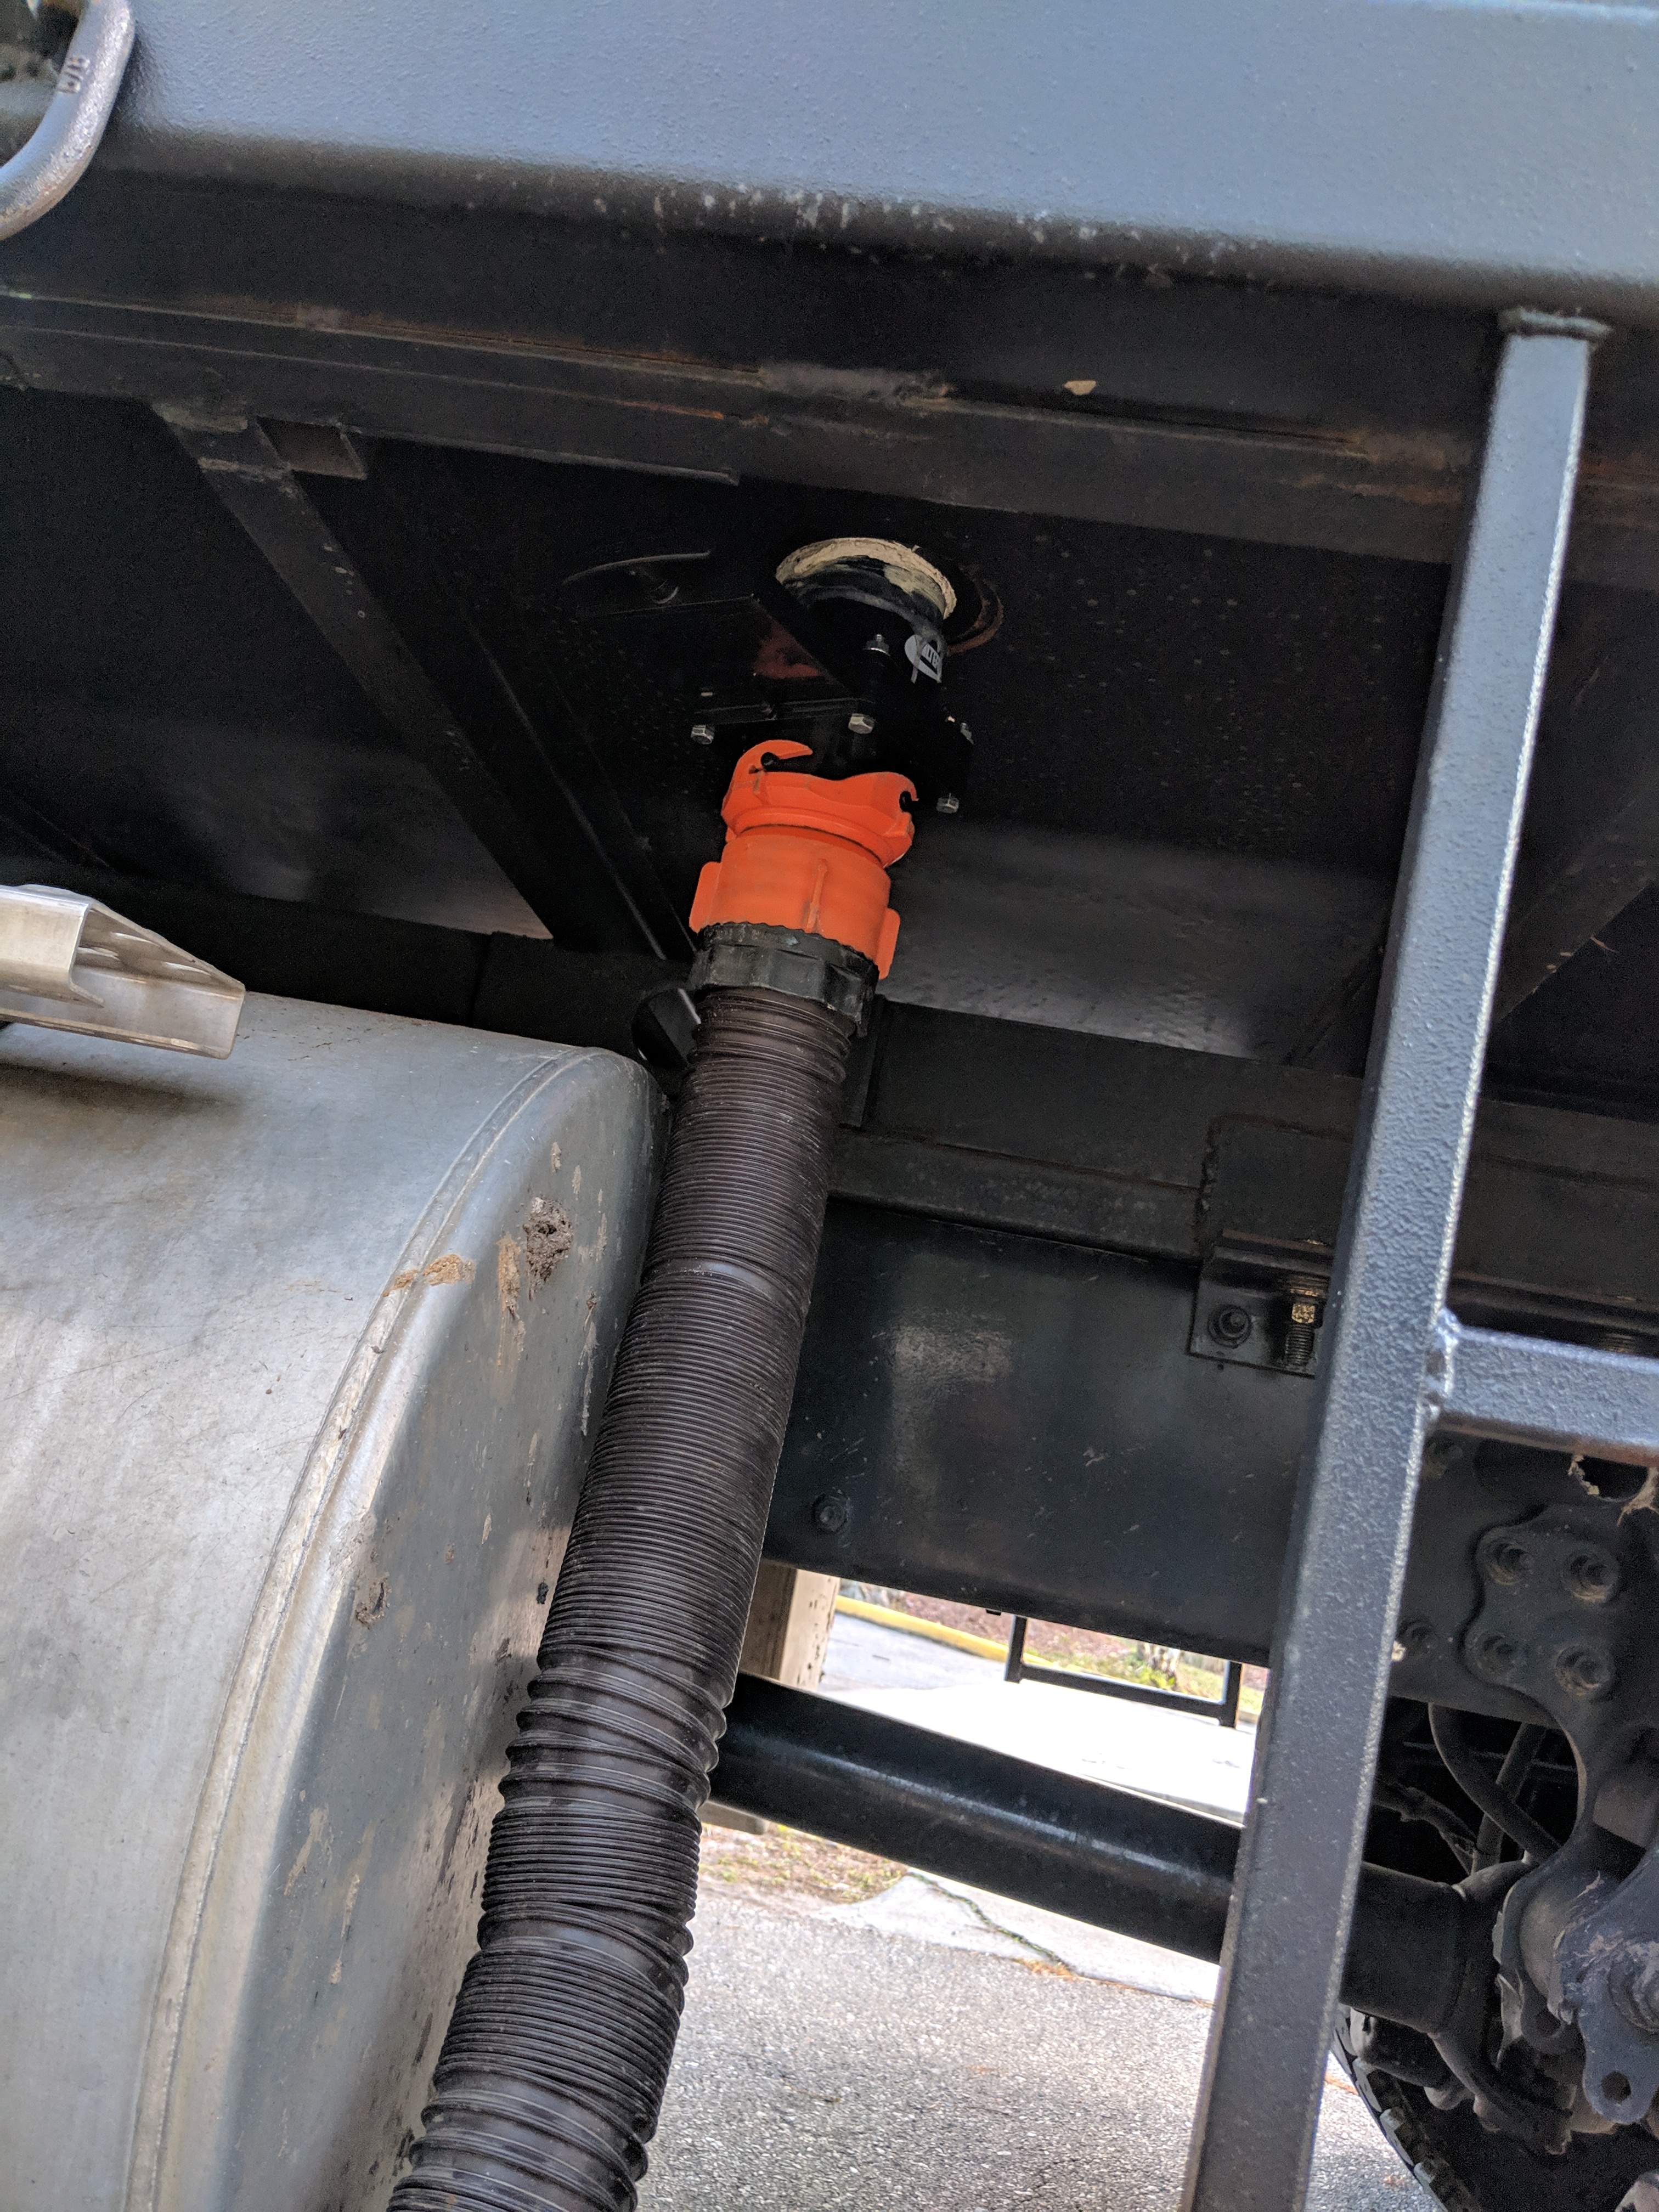 The truck now has an RV style waste valve.